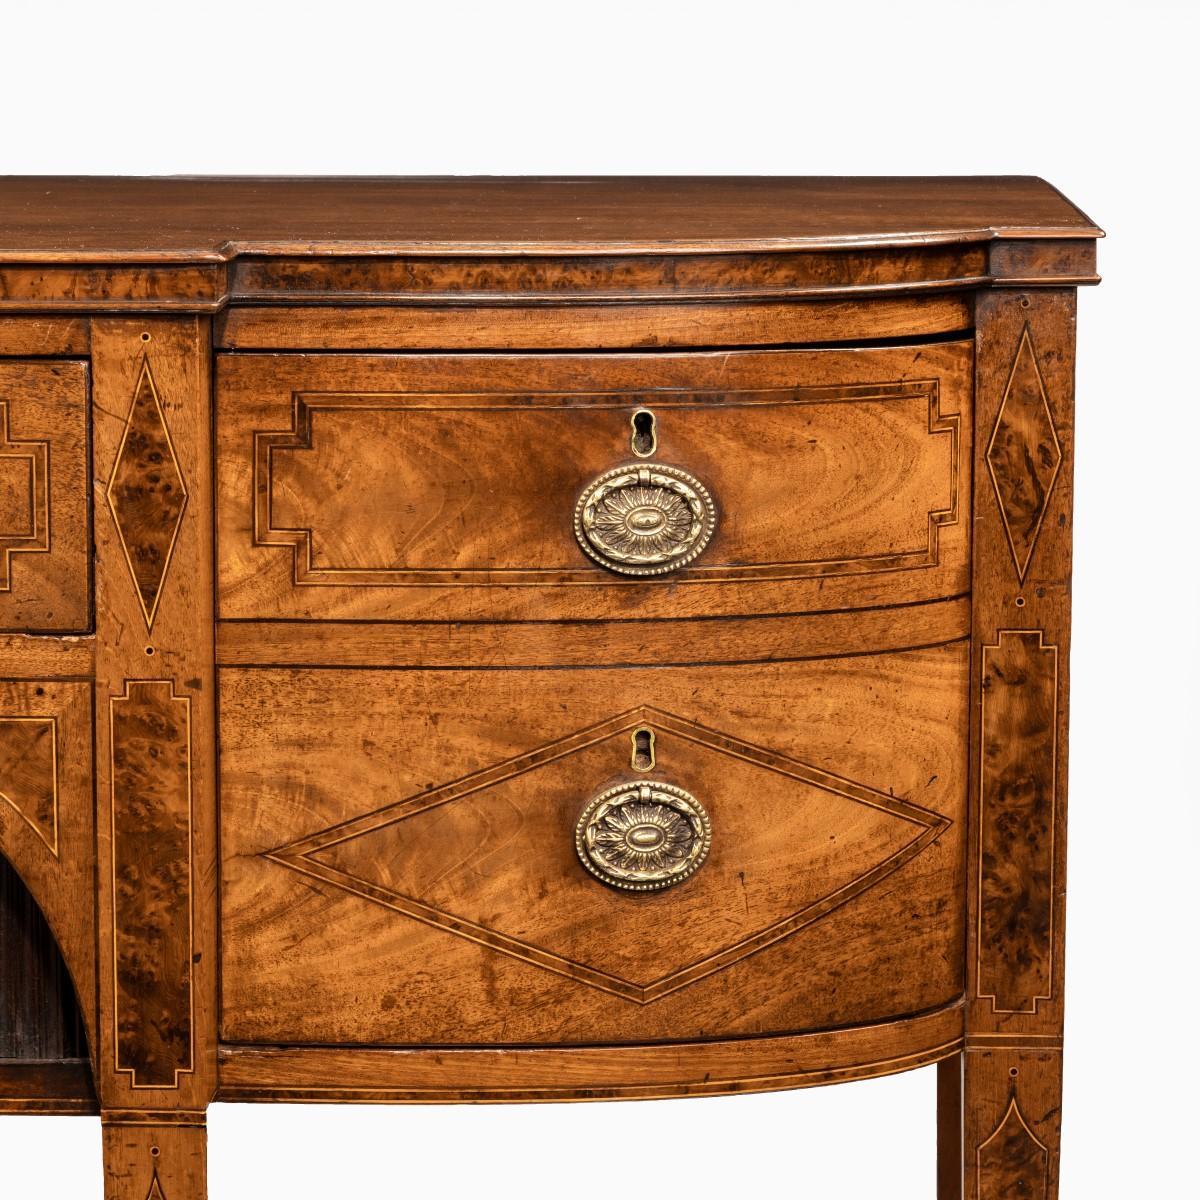 A George III breakfront yew-wood inlaid mahogany sideboard, of rectangular form with a central frieze drawer above tambour cupboard doors between further cupboards with dummy drawers and a single deep drawer, the left side return with a small